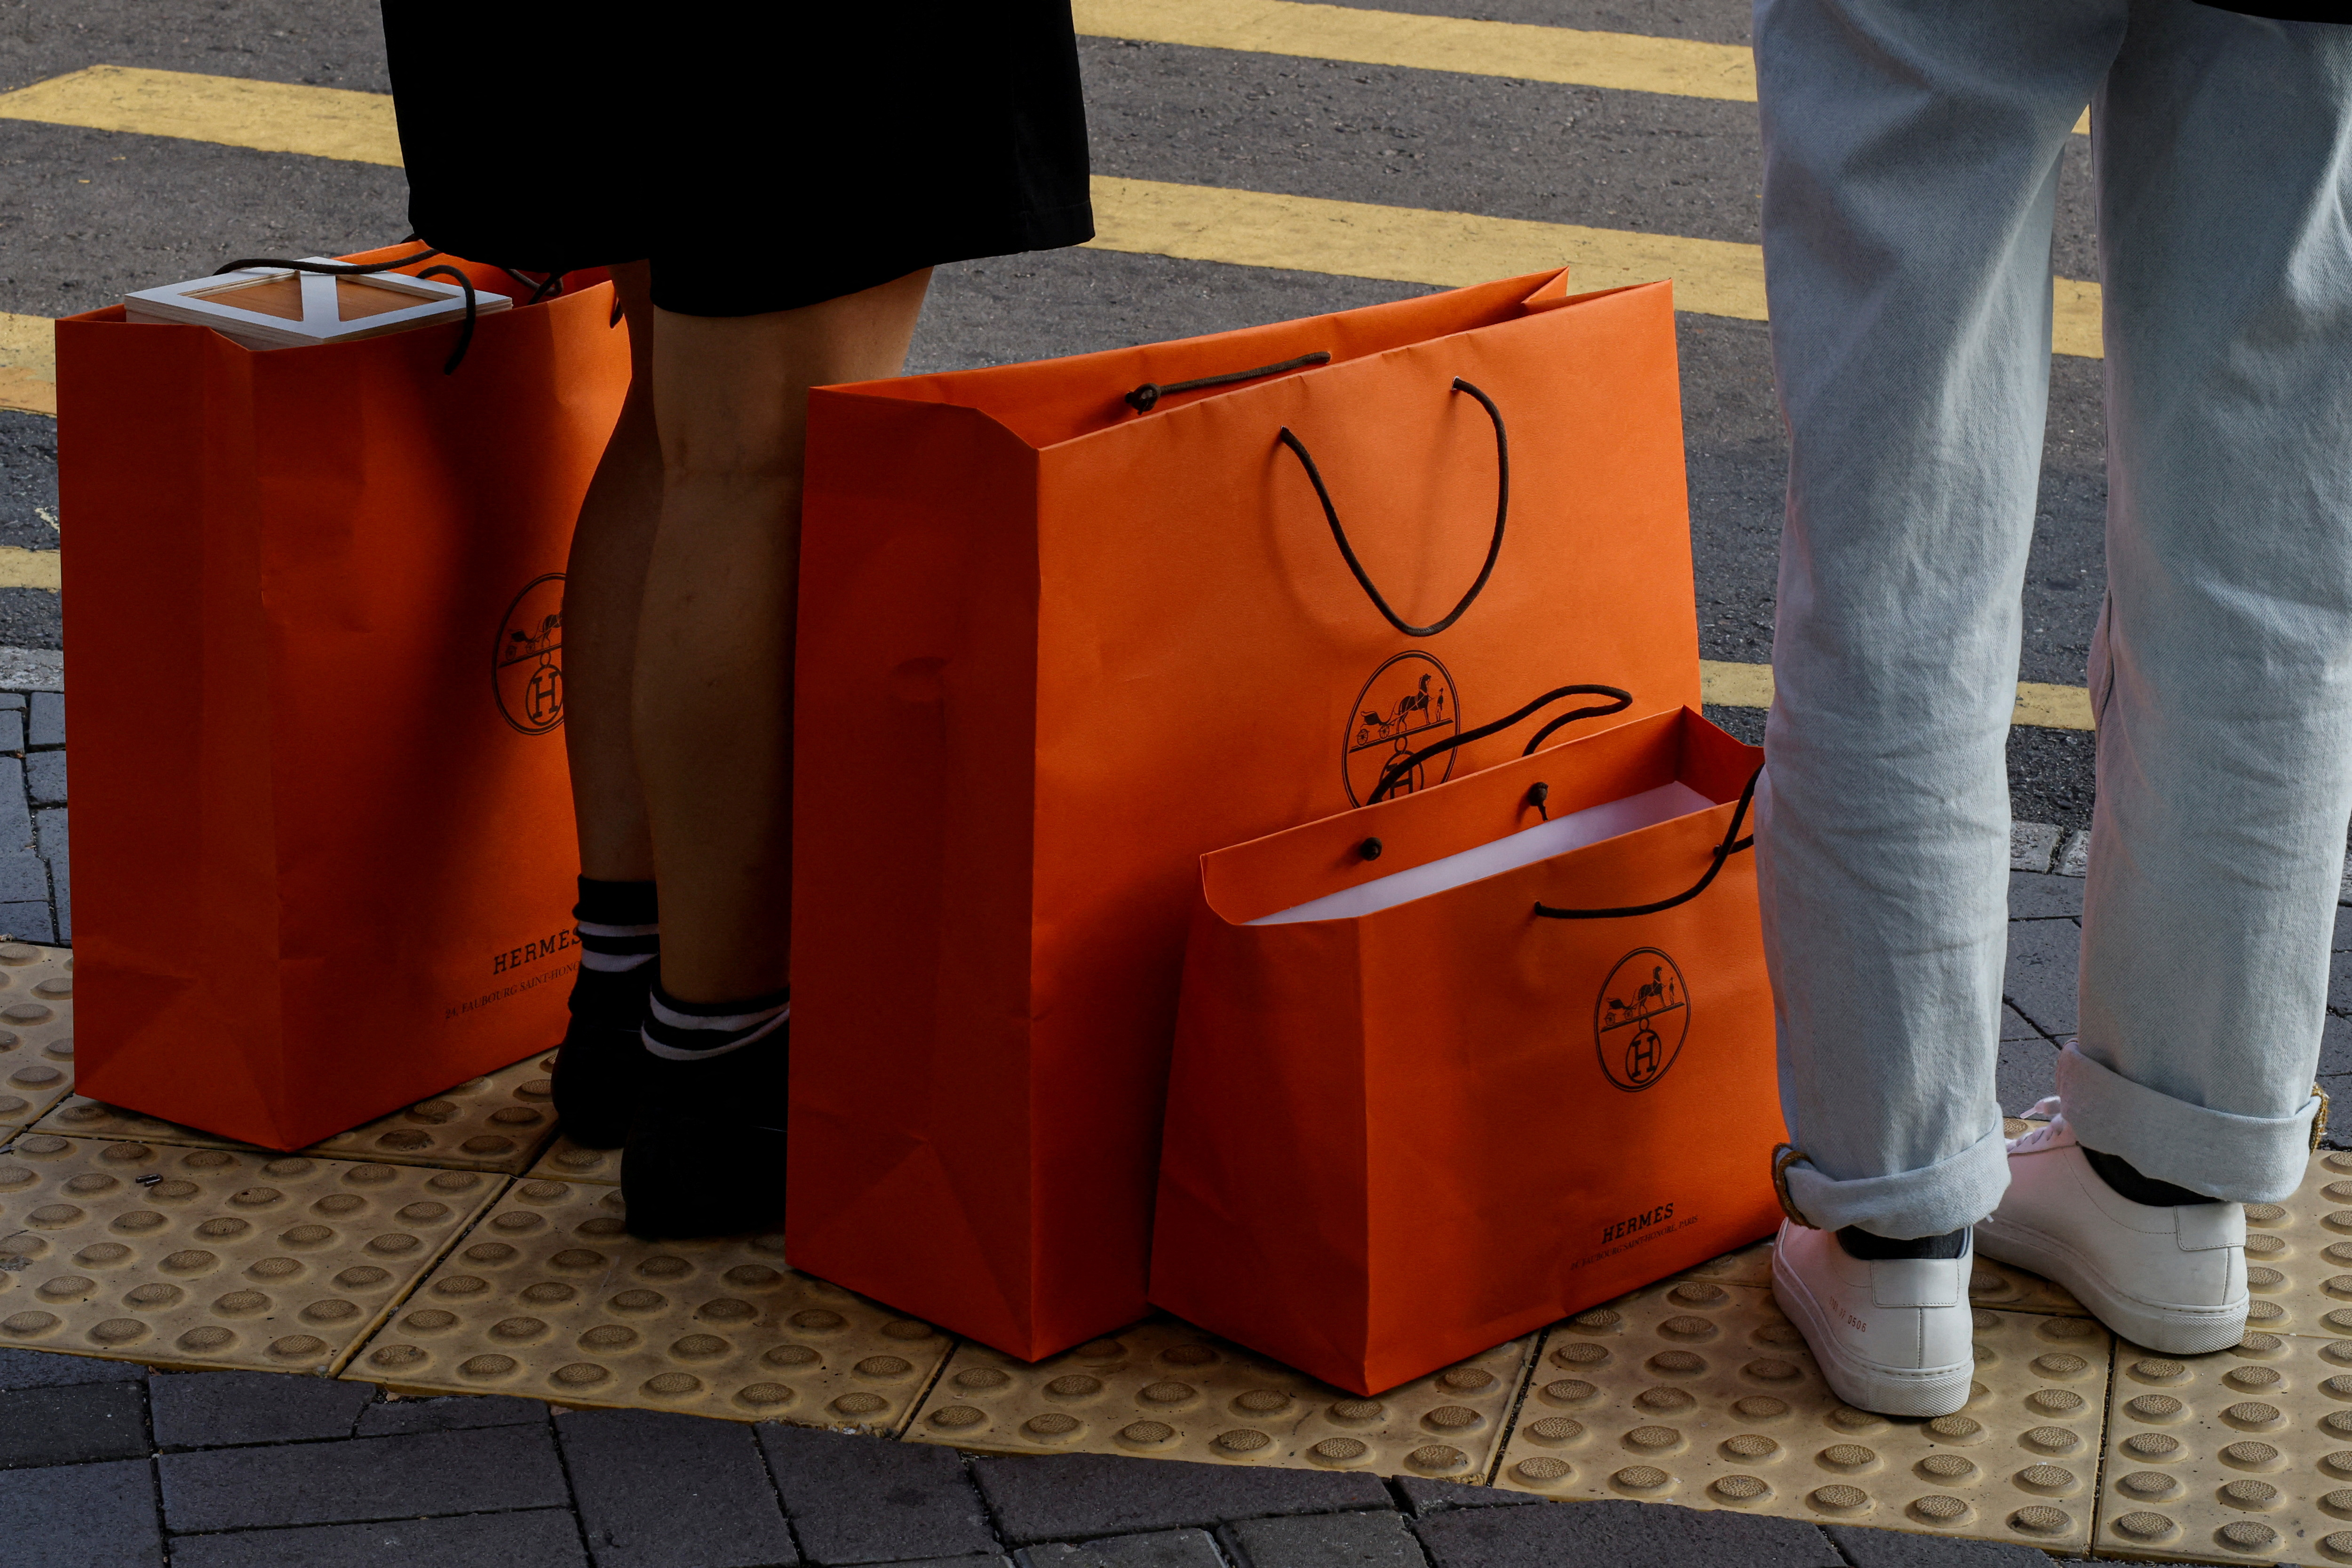 People stand with Hermes shopping bags as they wait at a traffic light in Tsim Sha Tsui, a bustling shopping hotspot, in Hong Kong